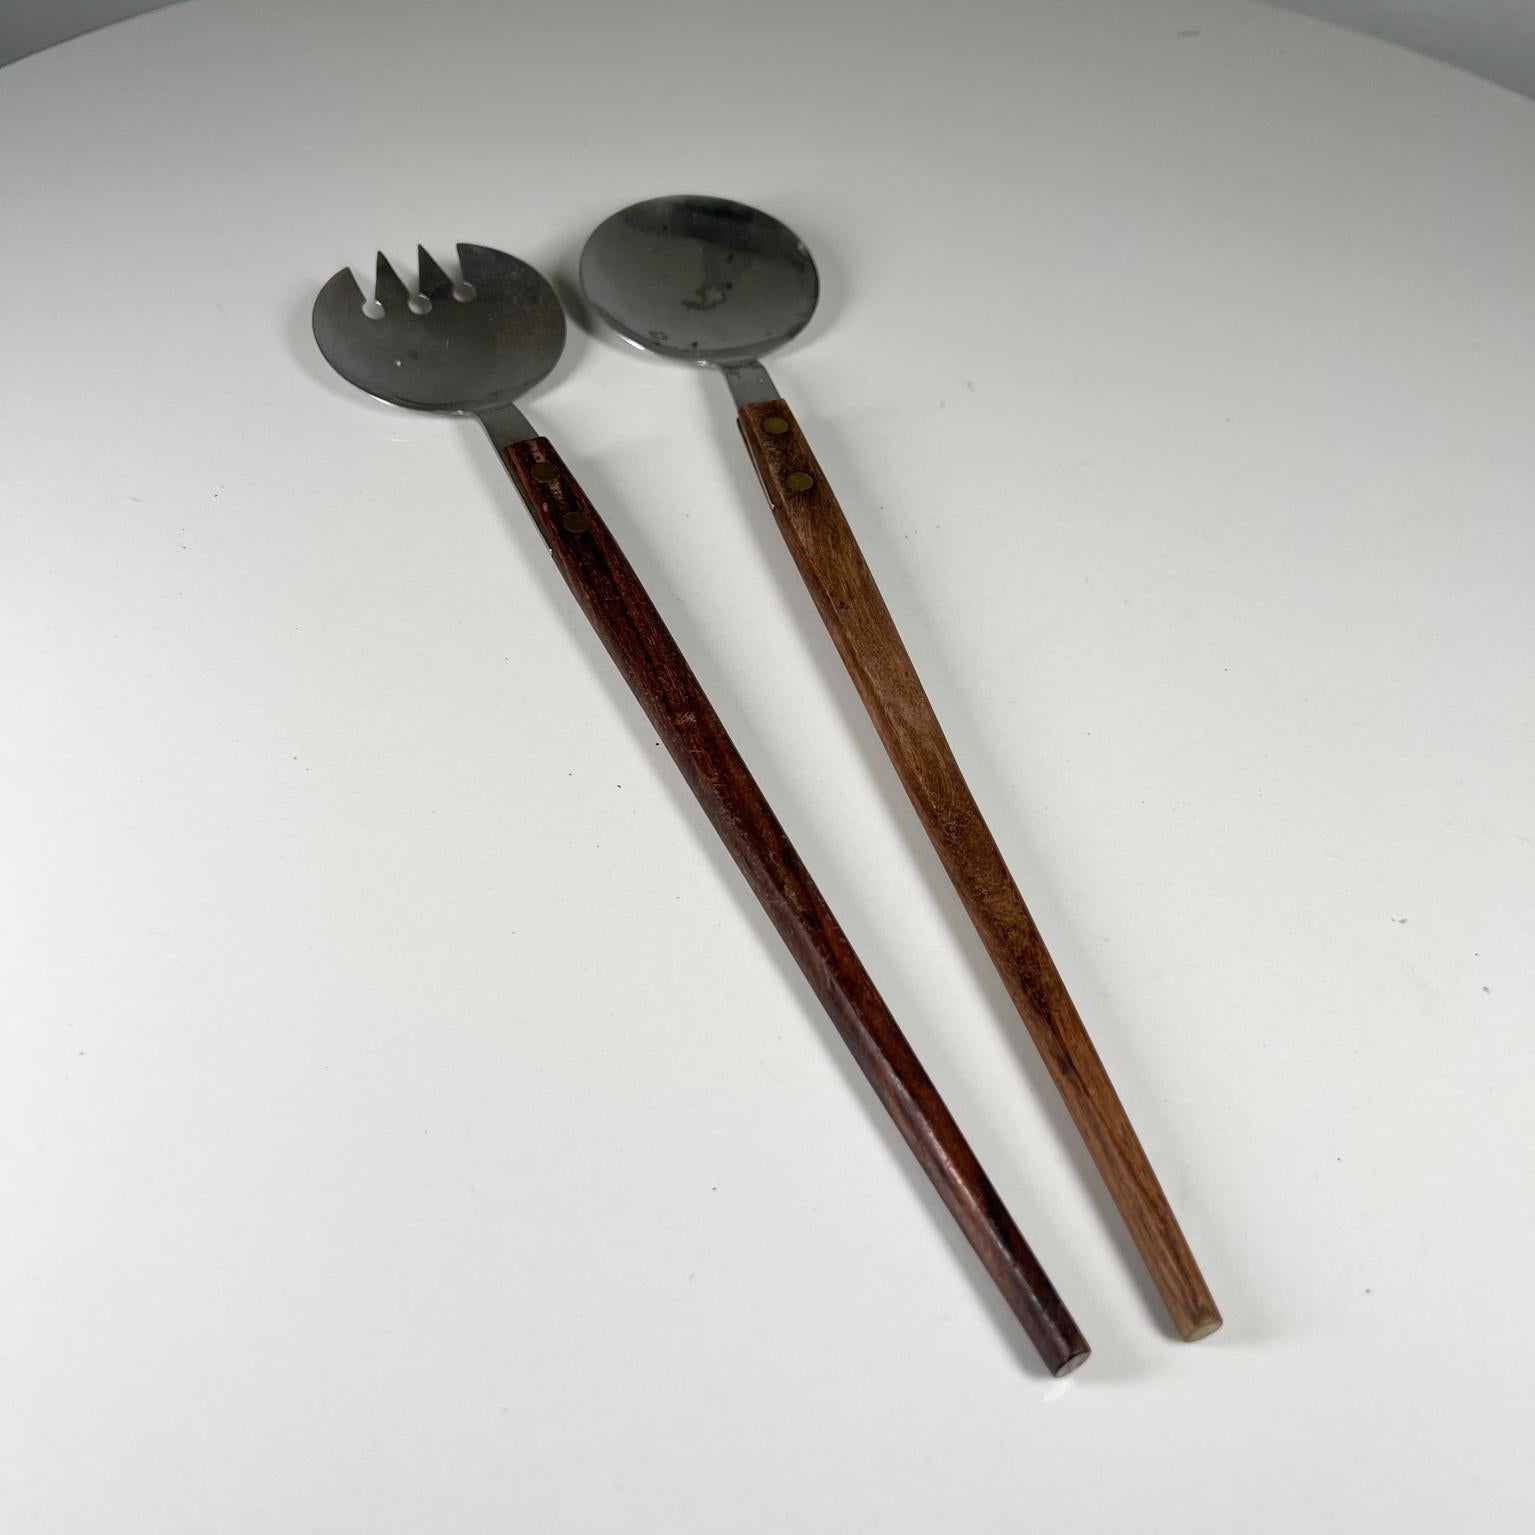 Japanese Mid-Century Modern salad server set utensils
Stainless Steel and Wood
Stamped
Dimensions: 11.75 x 2.38 x .5
Original vintage condition unrestored.
See all images provided.